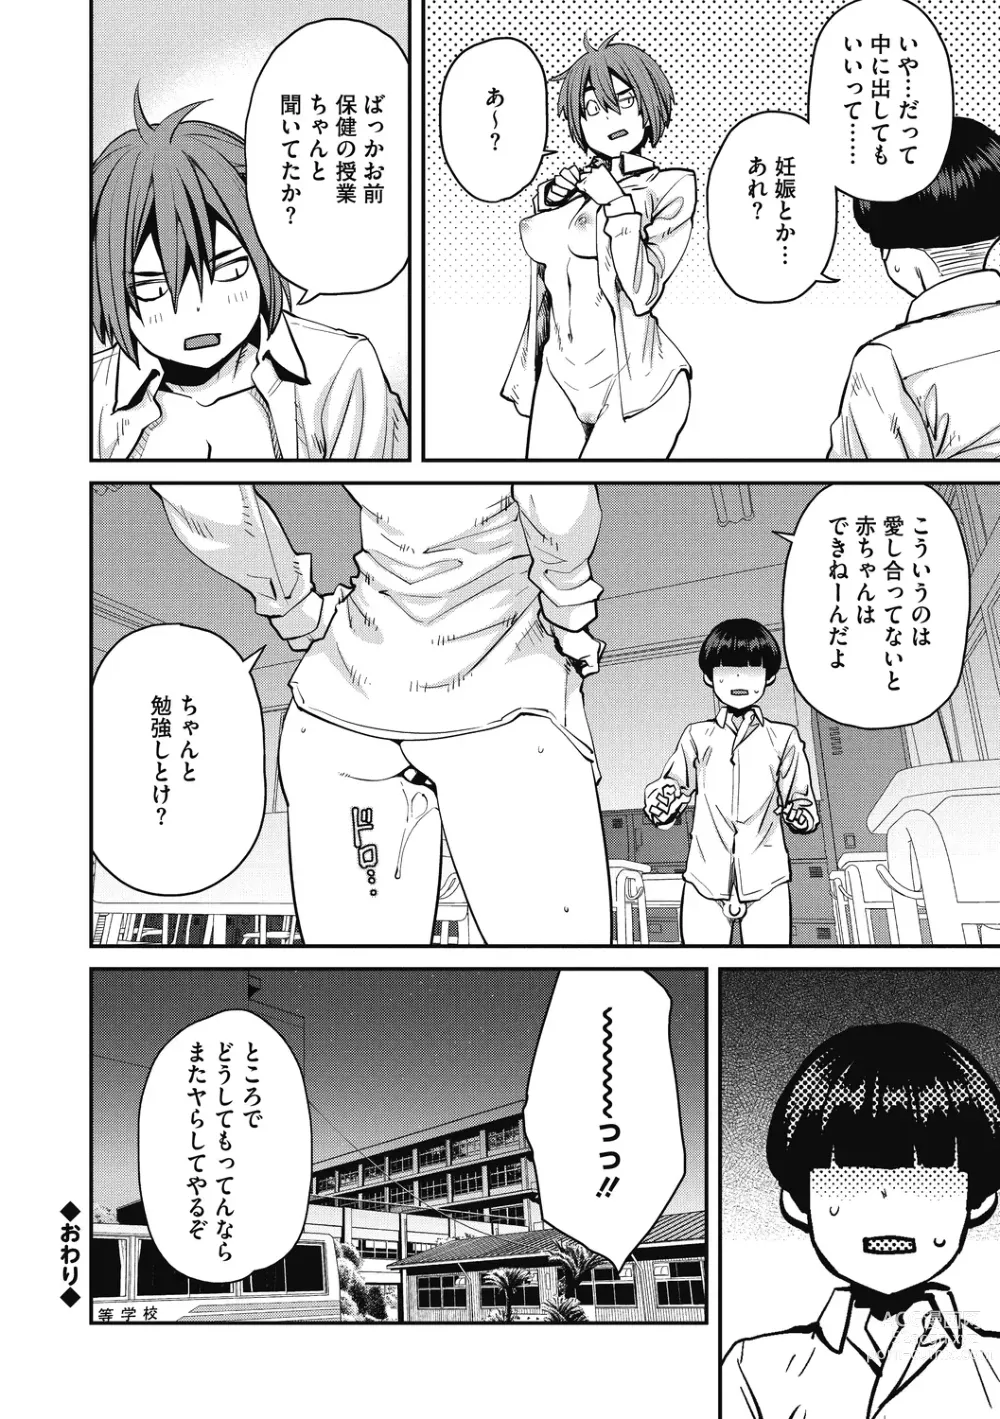 Page 210 of manga Sweet and Hot